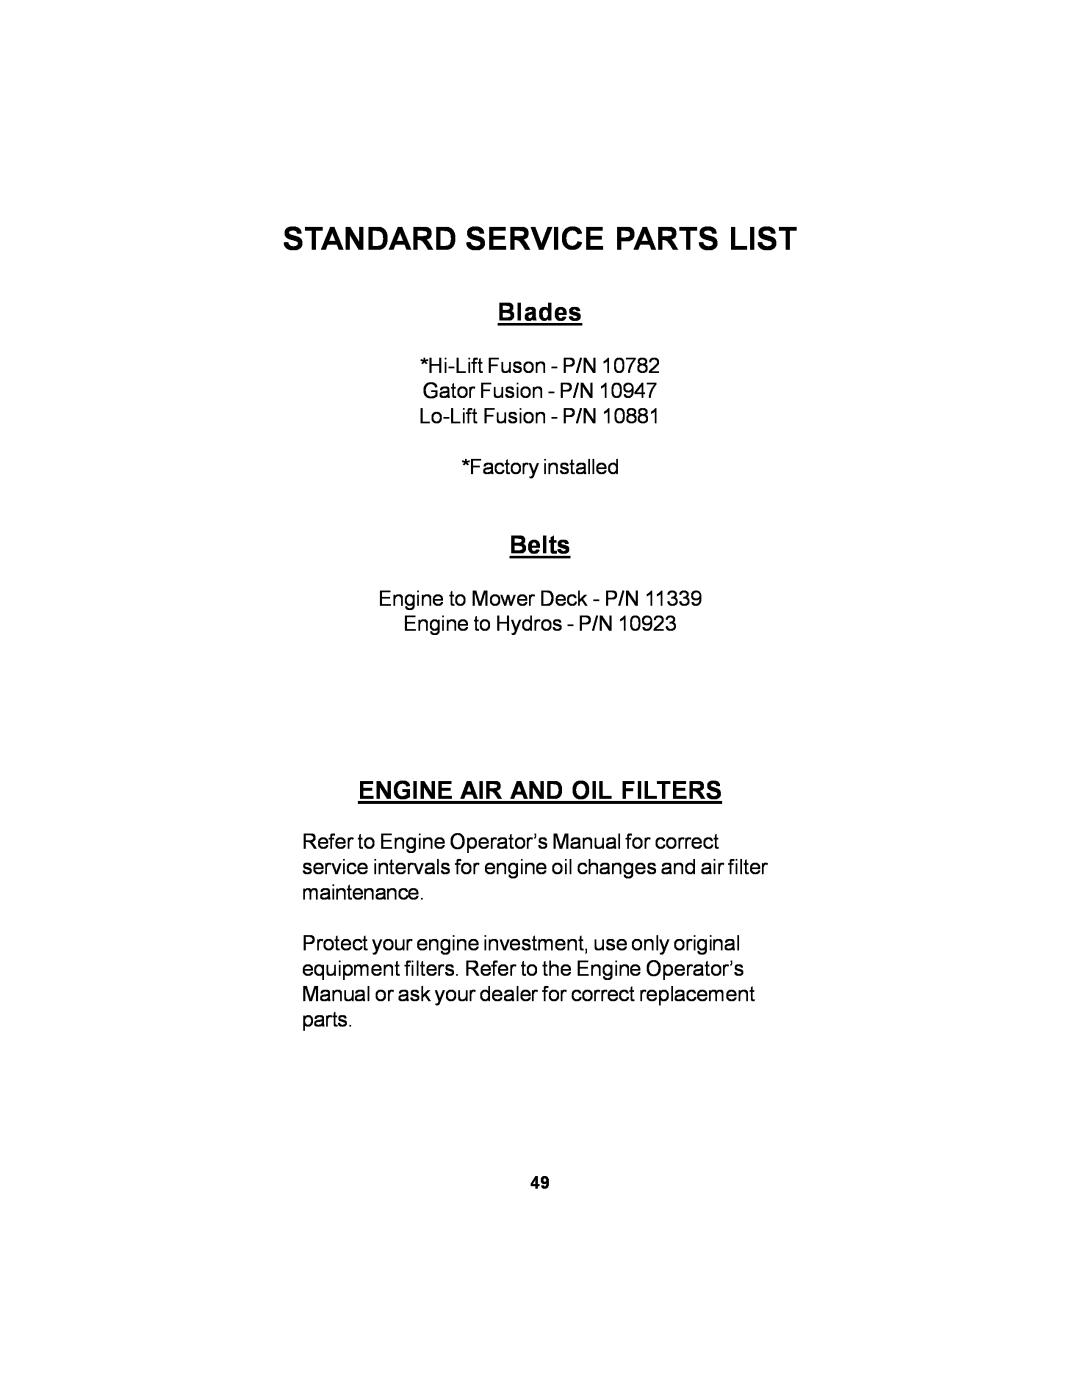 Dixon 18626-106 manual Standard Service Parts List, Blades, Belts, Engine Air And Oil Filters 